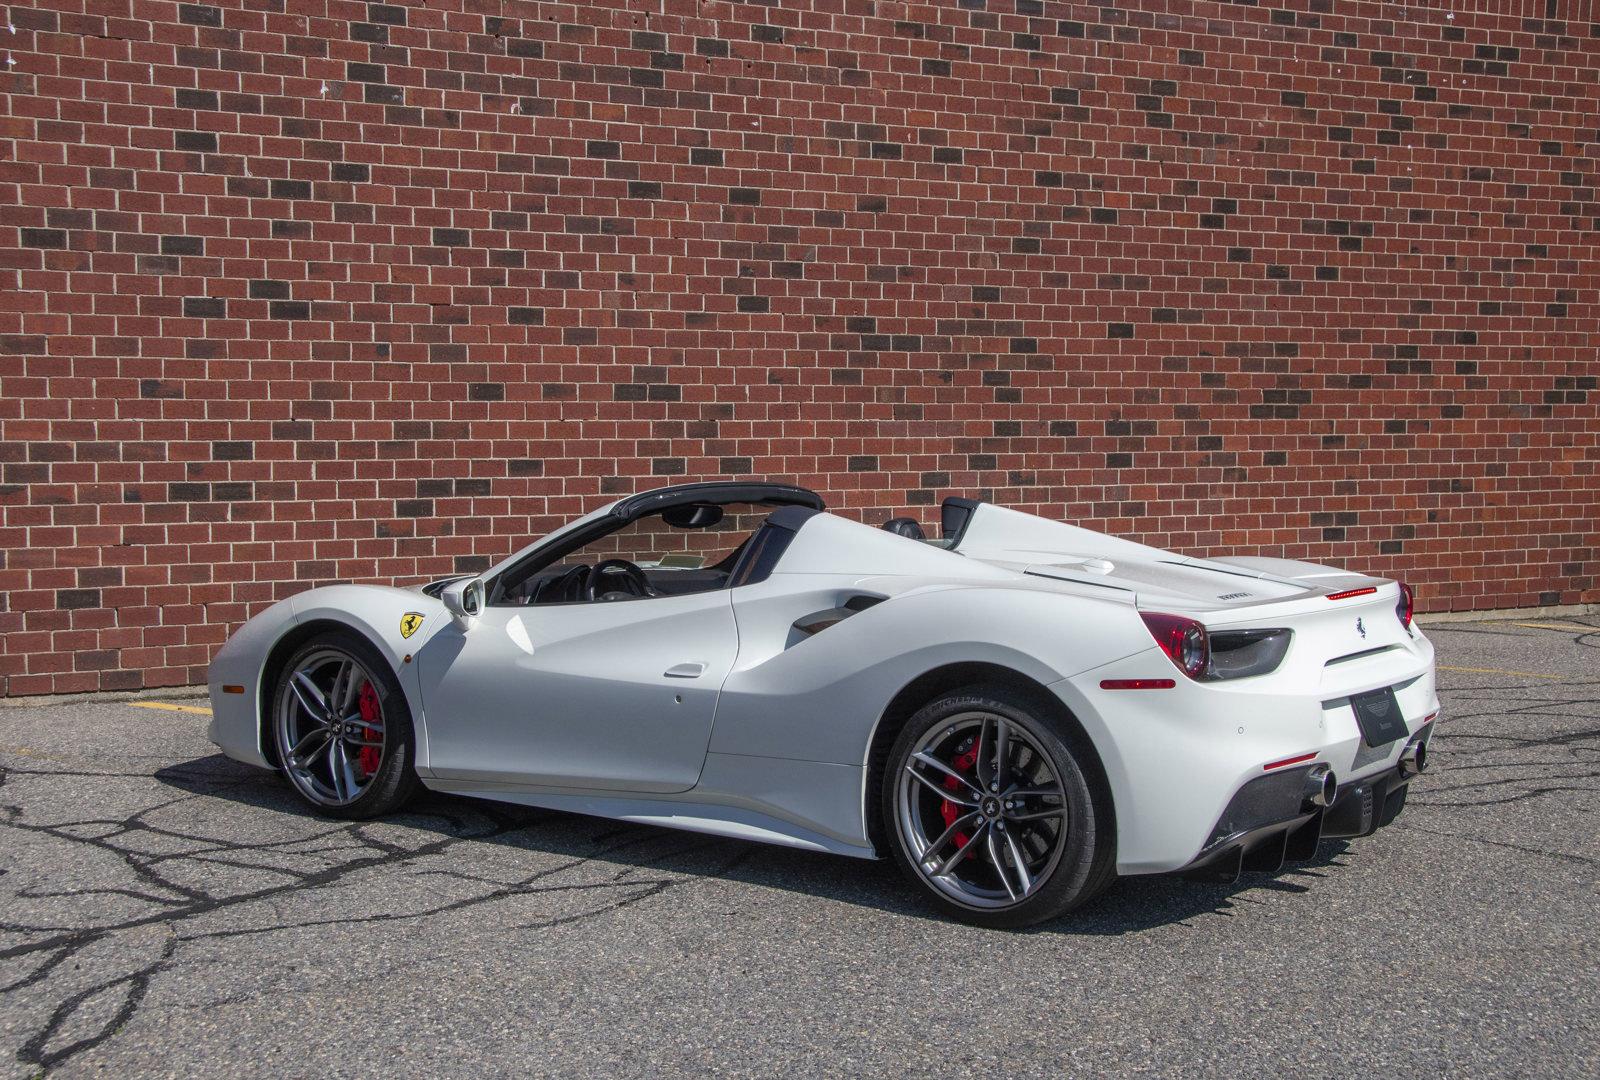 Used 2019 Ferrari 488 Spider Base with VIN ZFF80AMA7K0243675 for sale in Norwood, MA